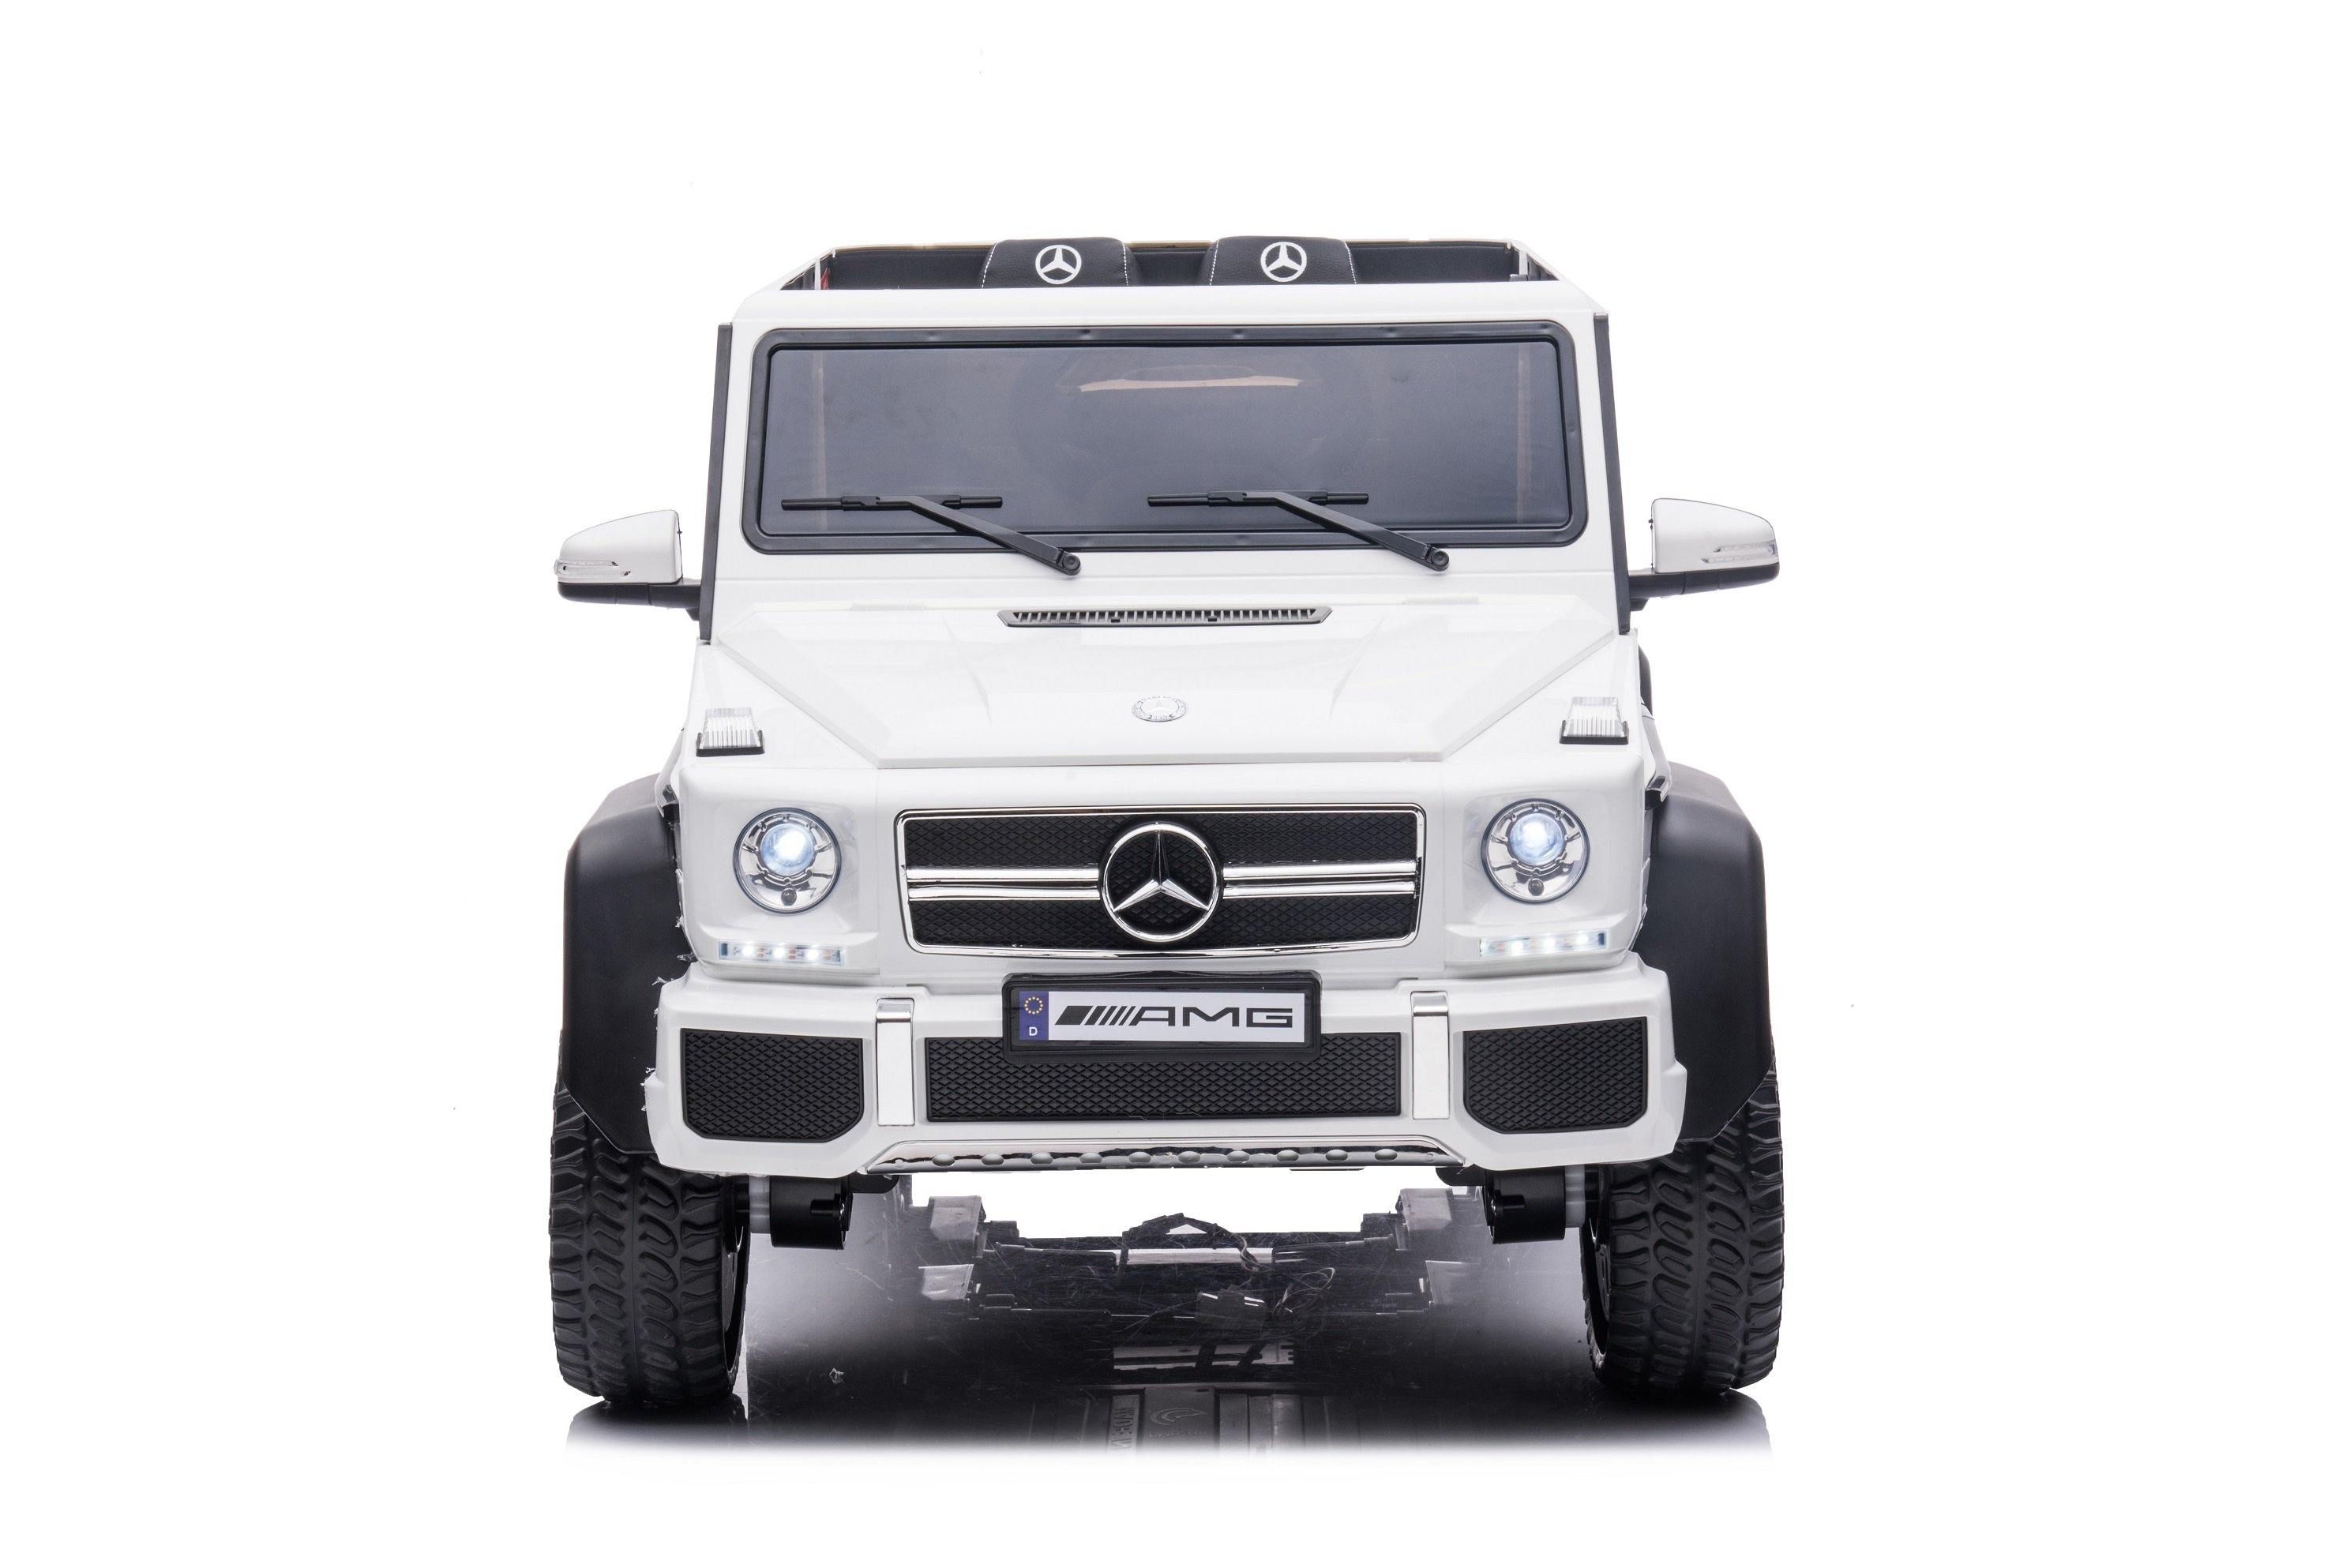 24V 6x6 Mercedes Benz G63 6 Wheels 1 Seater Ride on Car Kids Cars CA - Ride On Toys Store